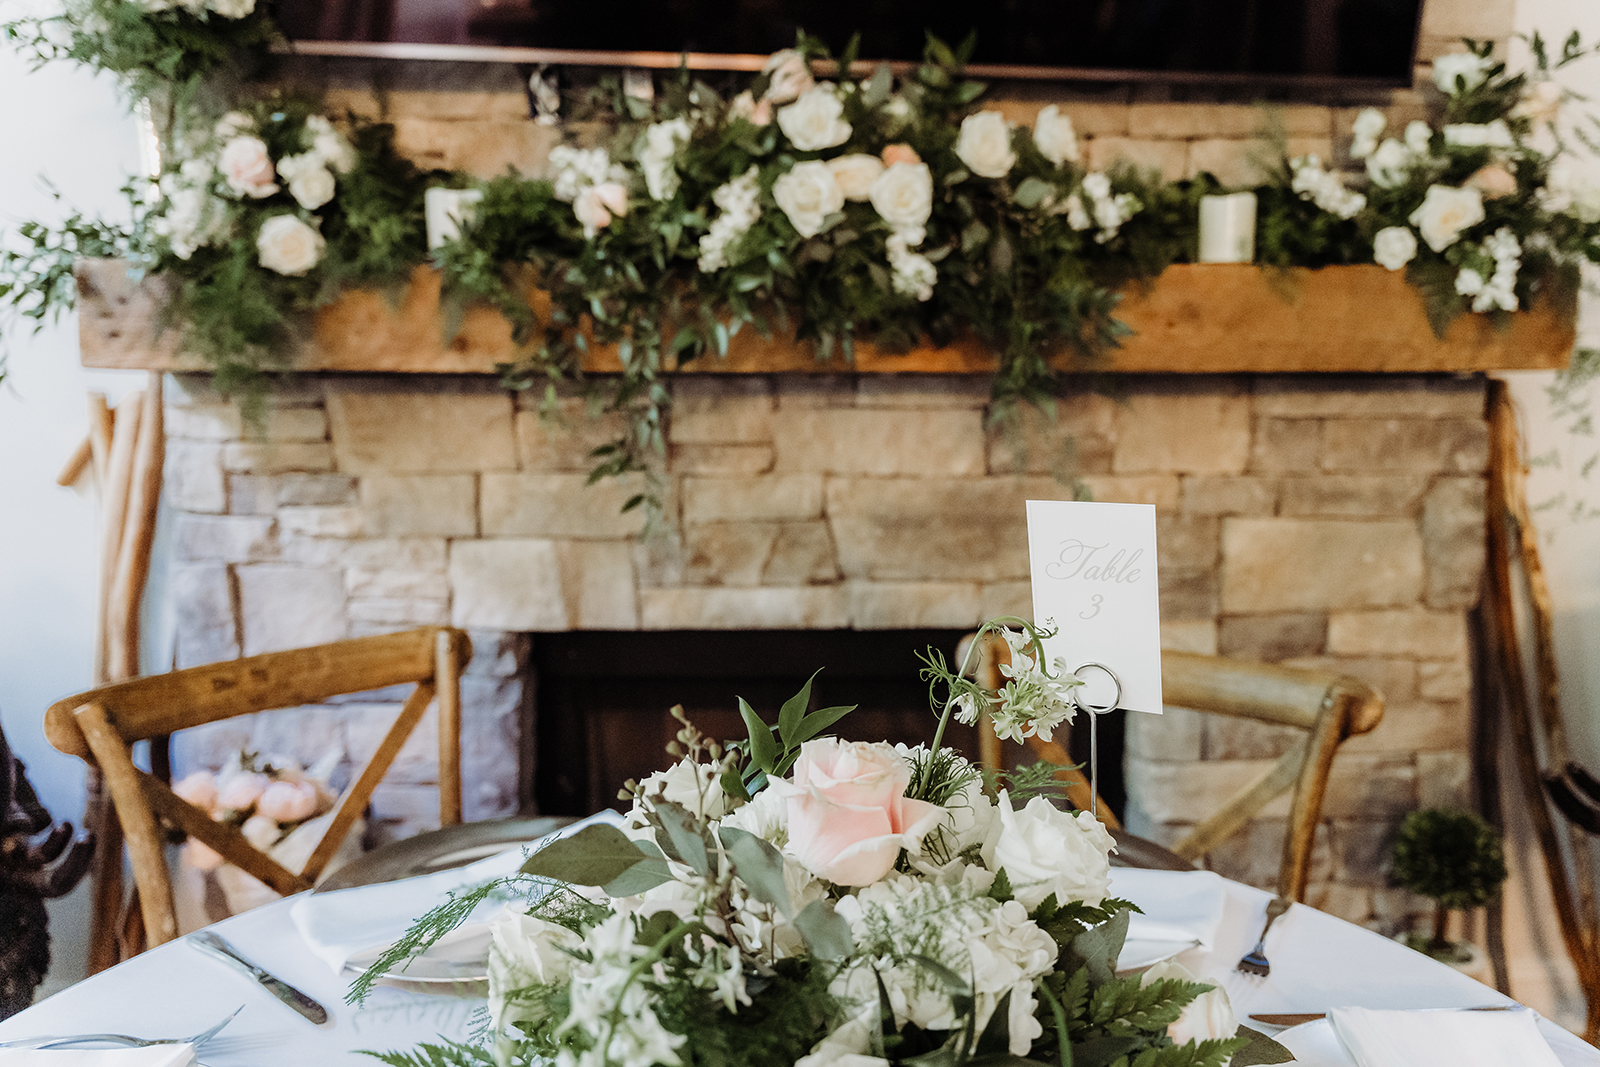 Skyline Events and Socials Floral for Mantle at home wedding